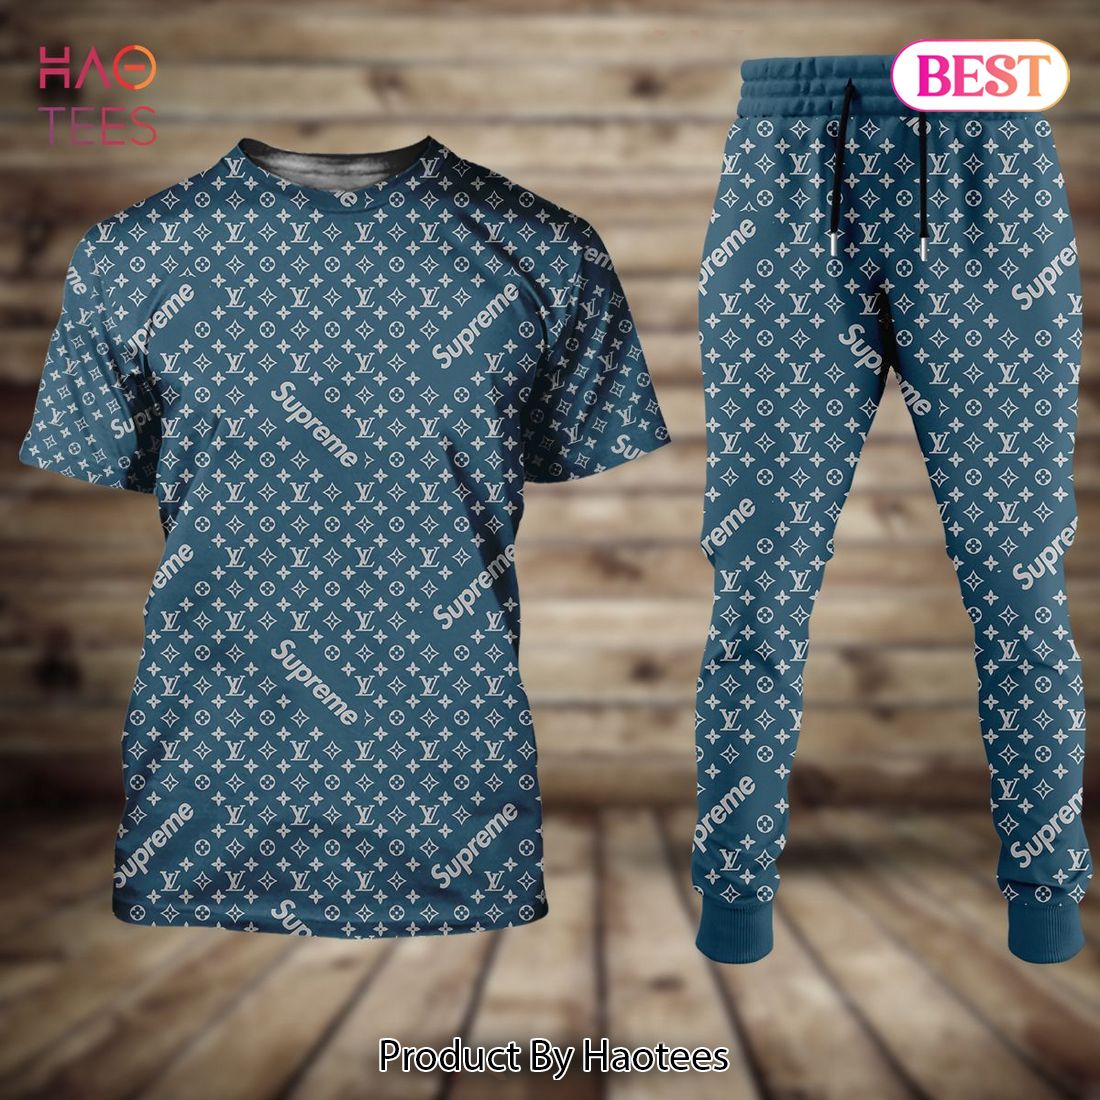 NEW Louis Vuitton Full Blue Color Luxury Brand T-Shirt And Pants POD Design